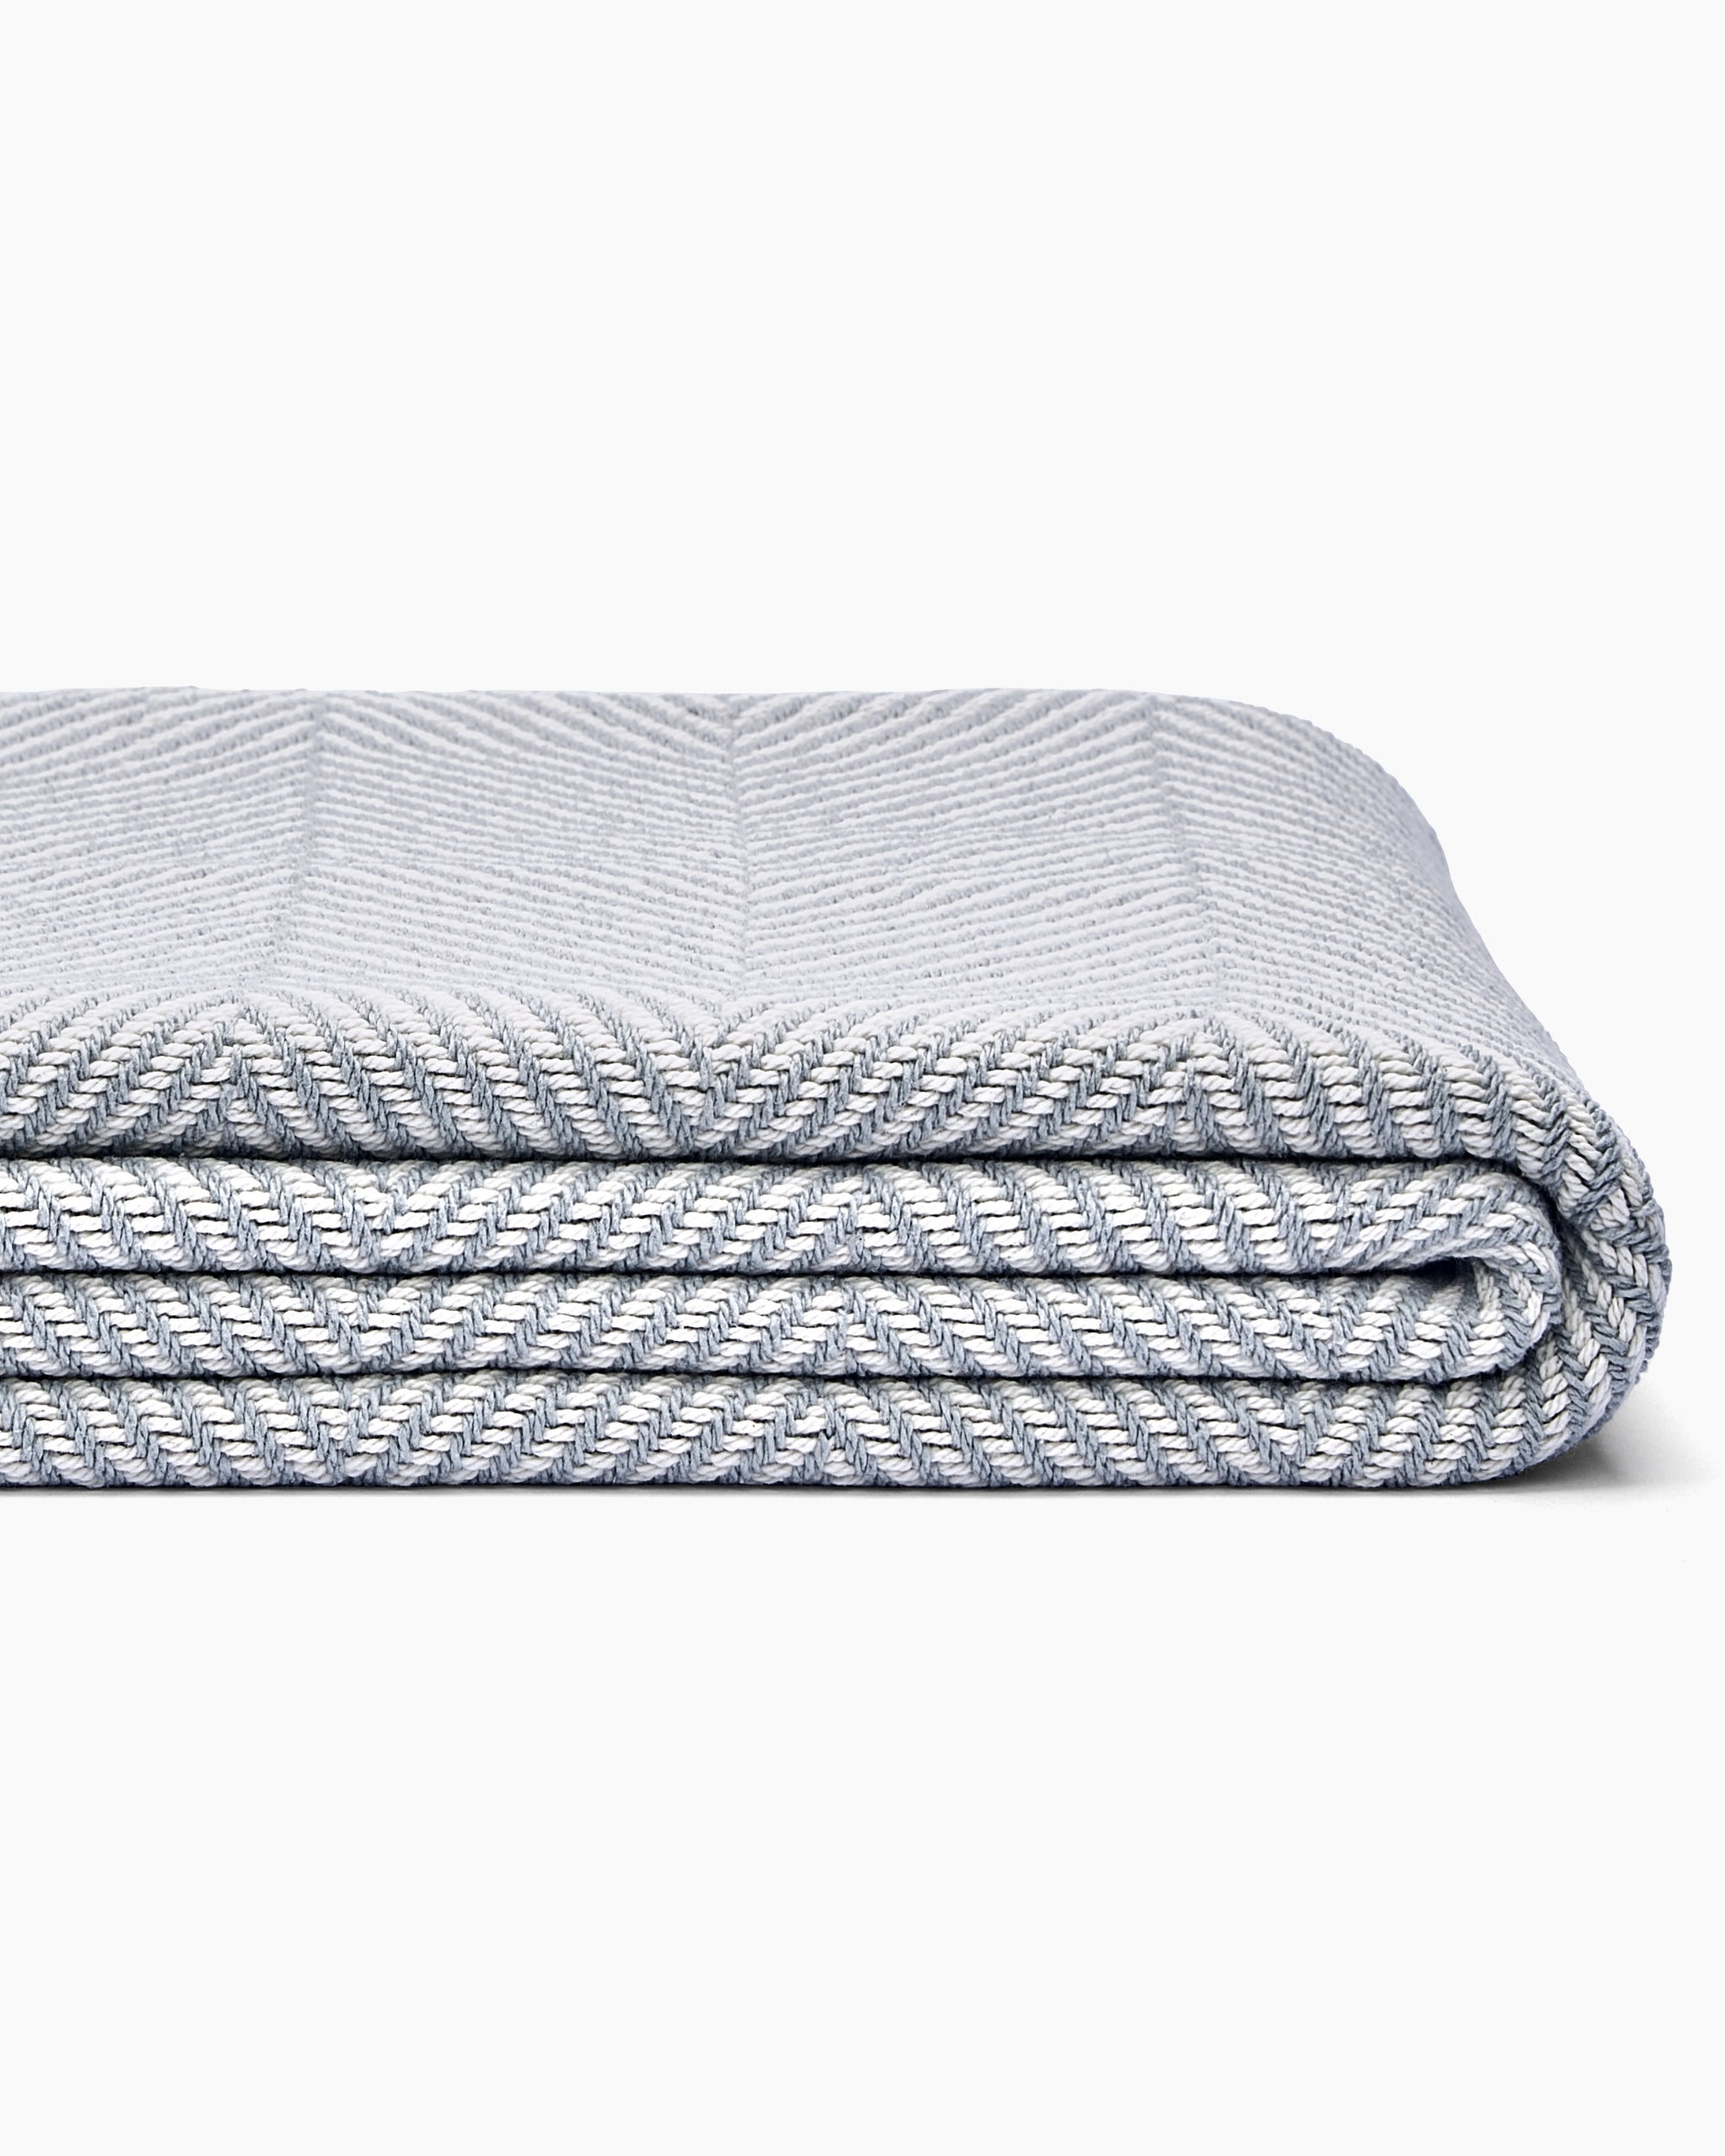 made in maine herringbone bed size blanket cover throw in cascade gray